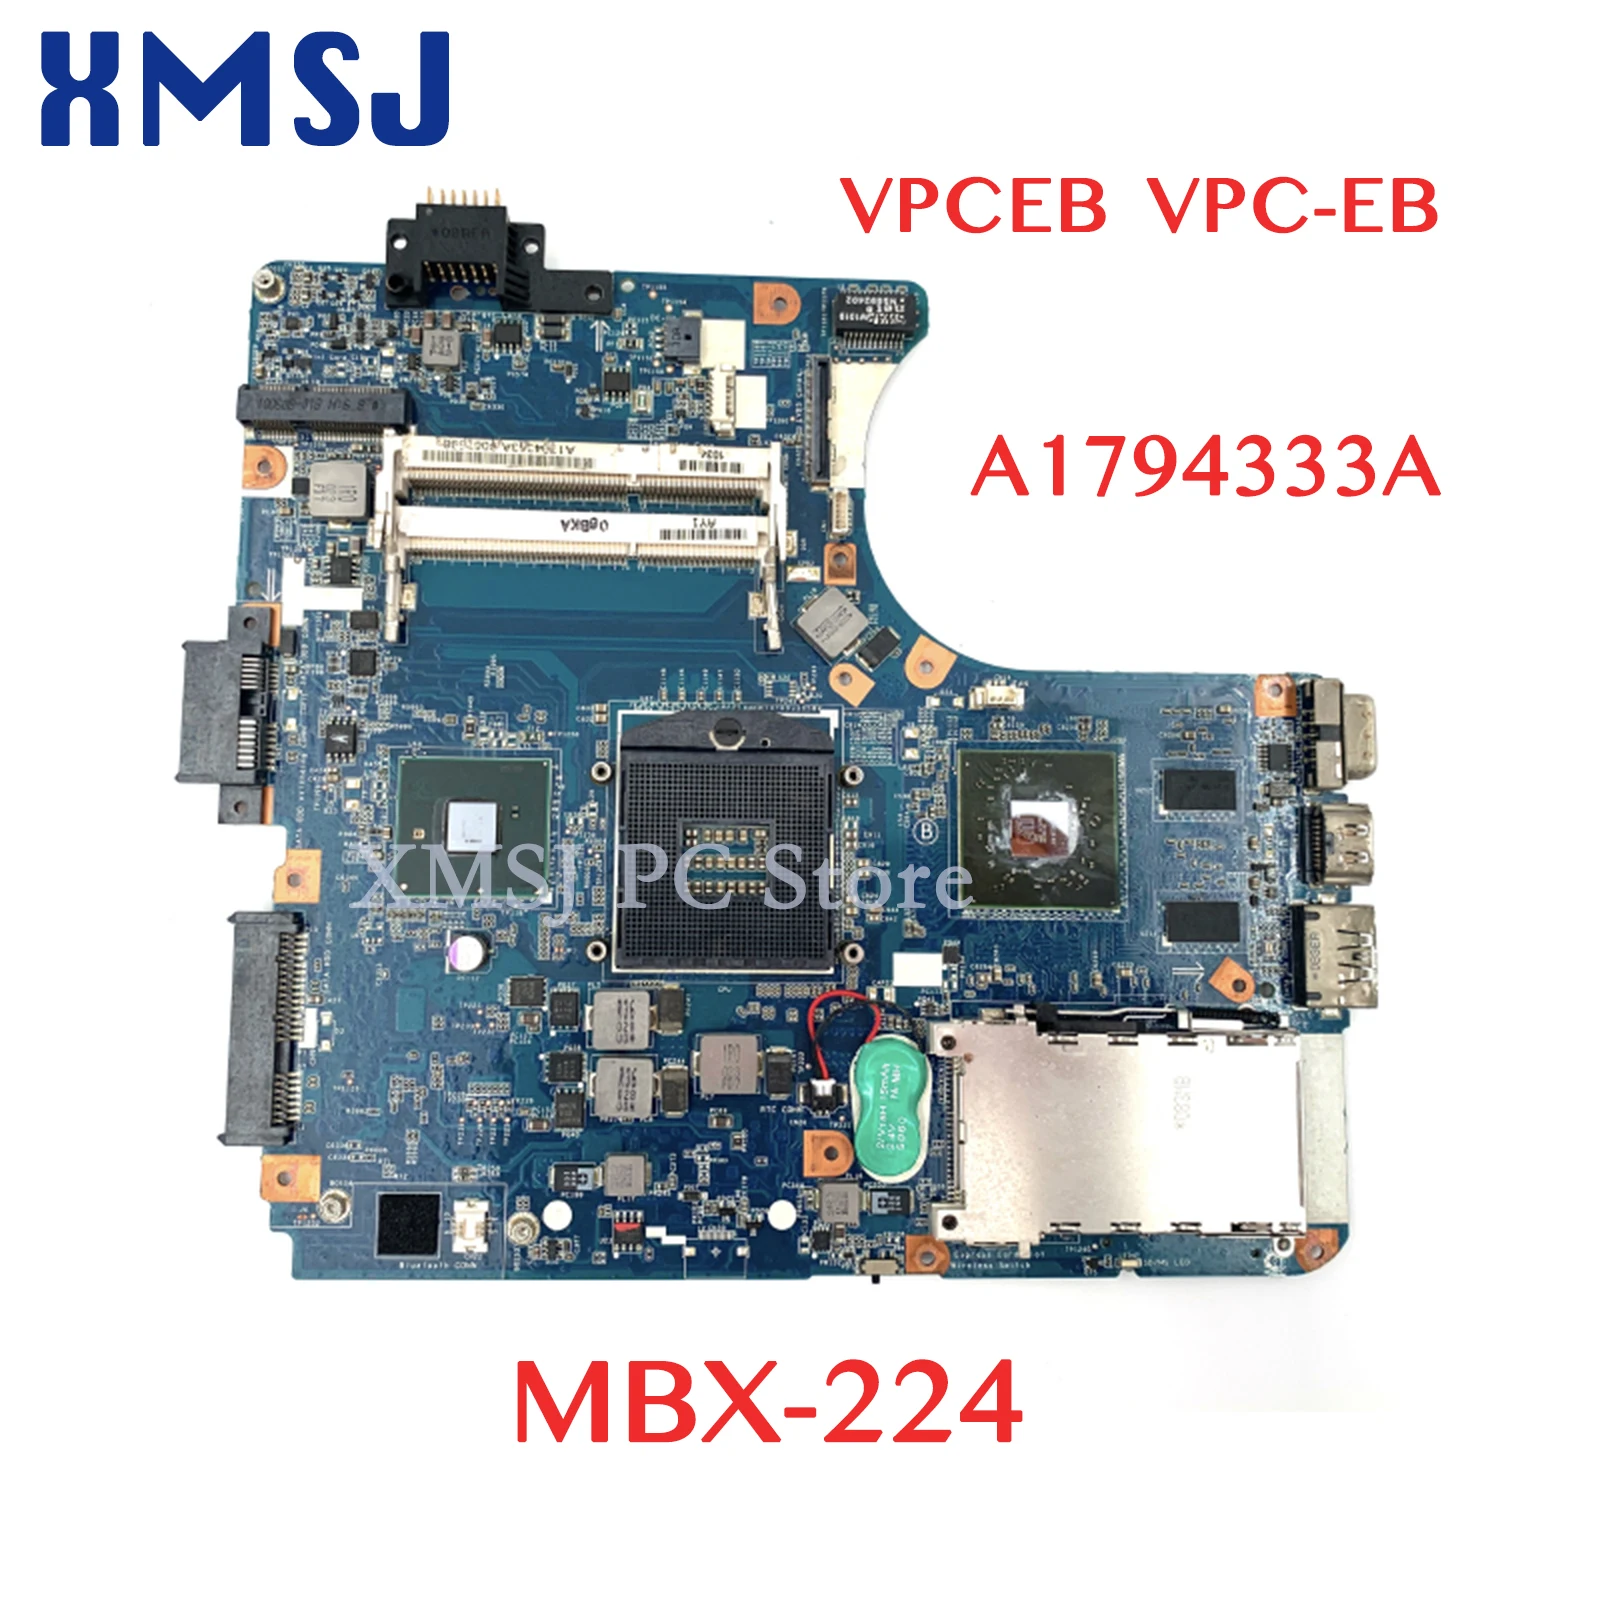 XMSJ For SONY Vaio VPCEB VPC-EB A1794333A Laptop Motherboard HD 5650 HM55 DDR3 MBX-224 M961 1P-0106200-8011 Main Board